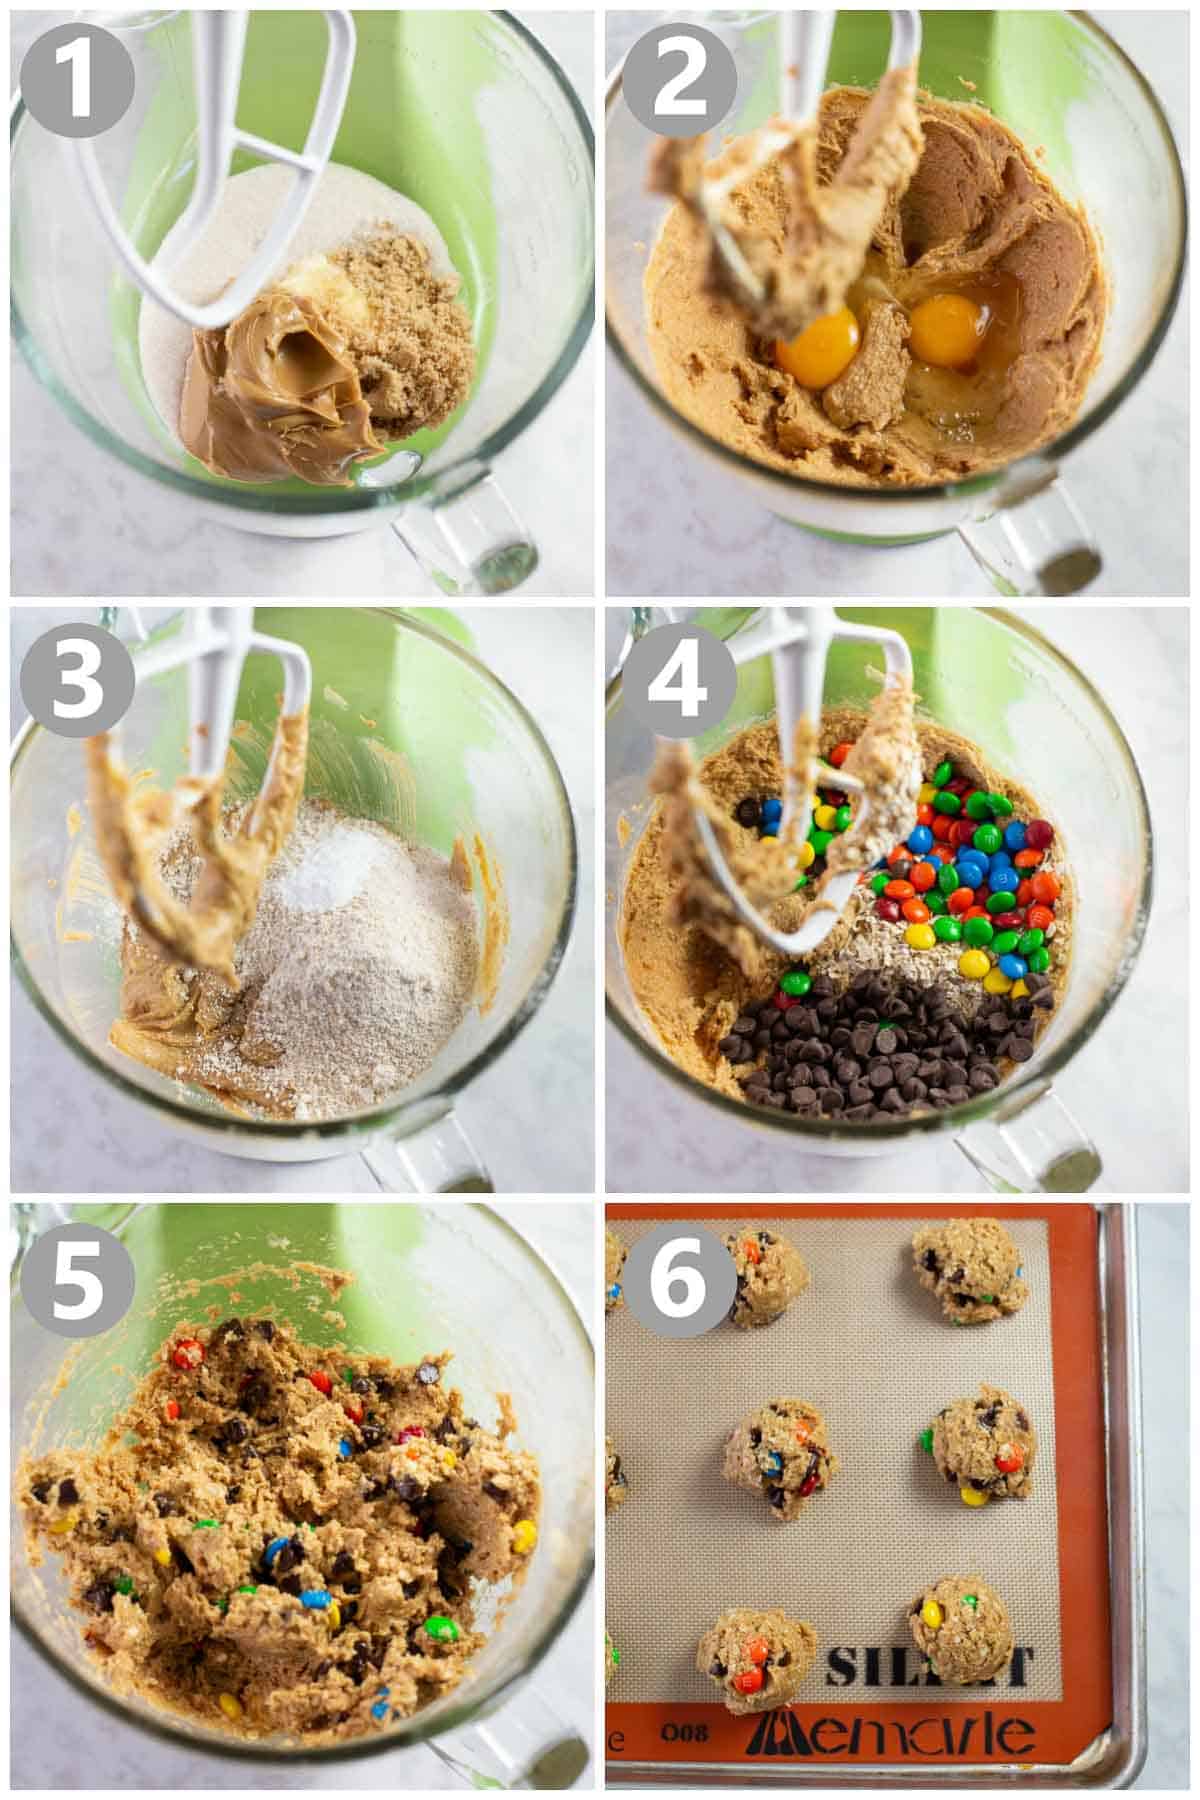 step by step instructions showing how to make a monster cookie recipe